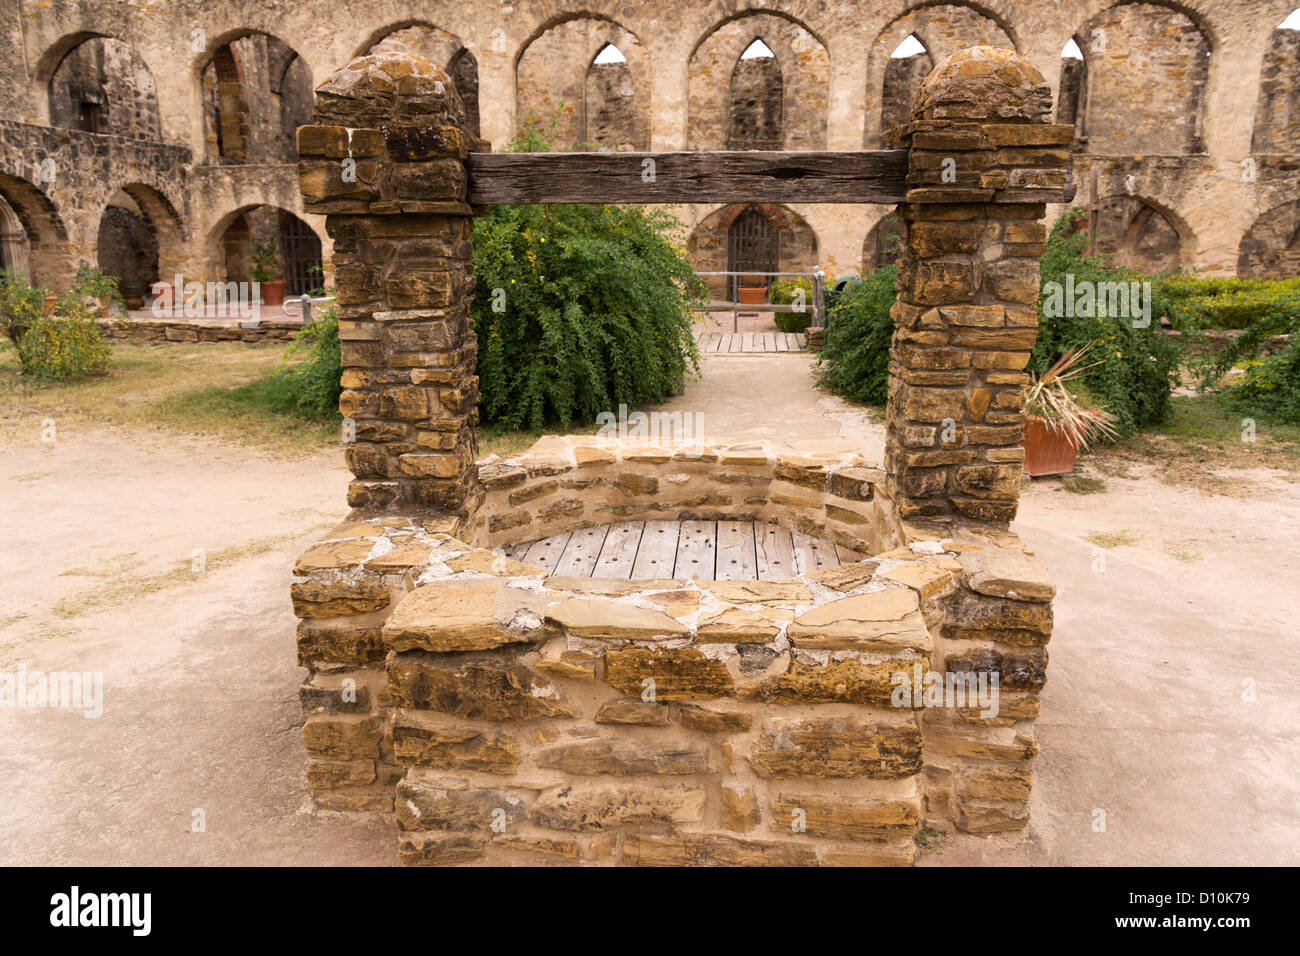 A community well within the compound at Mission San Jose in San Antonio, Texas. Stock Photo